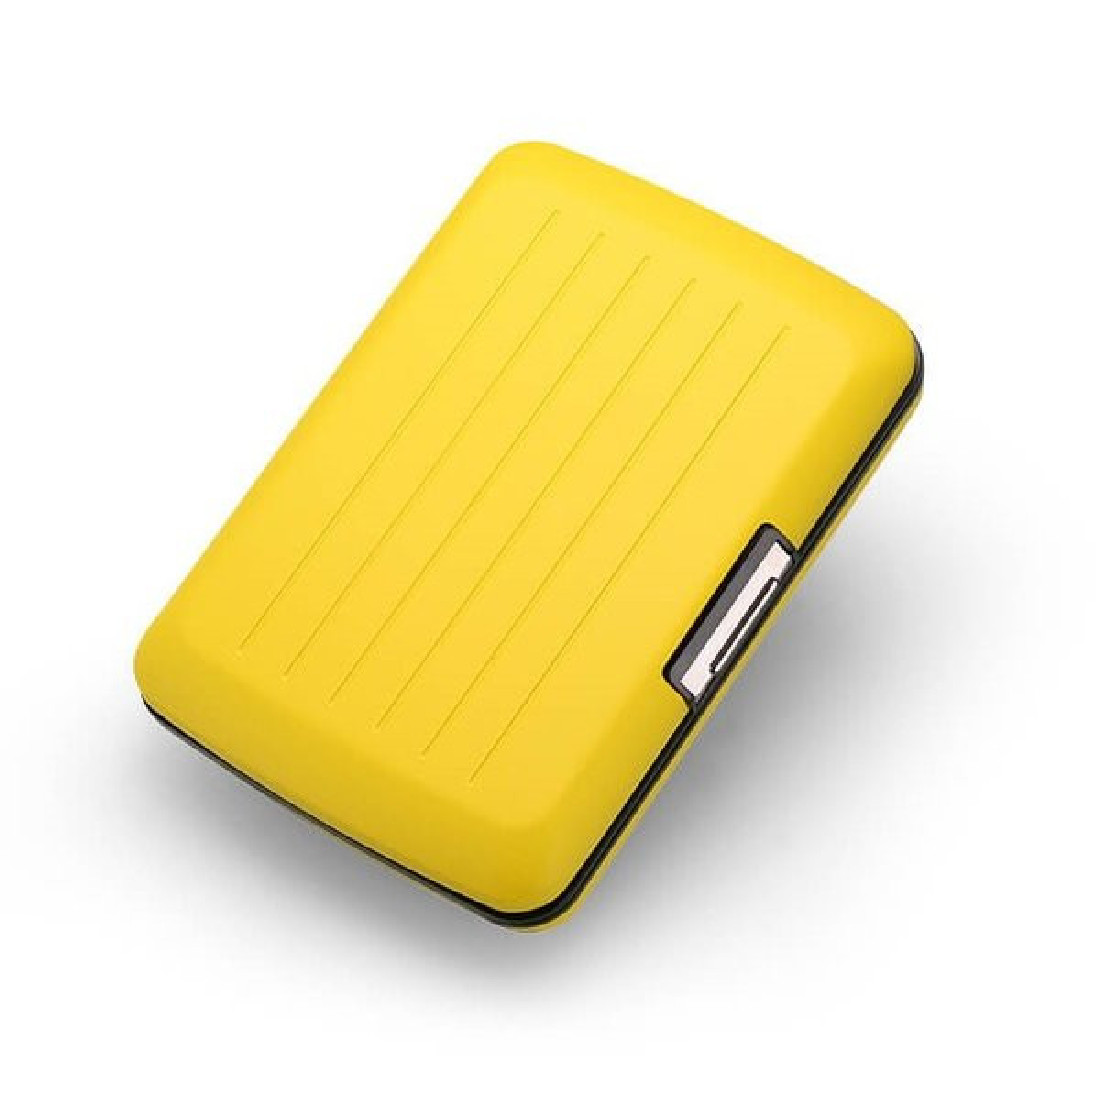 OGON CARD CASE TAXI YELLOW STOCKHOLM 10 CARDS + CASH